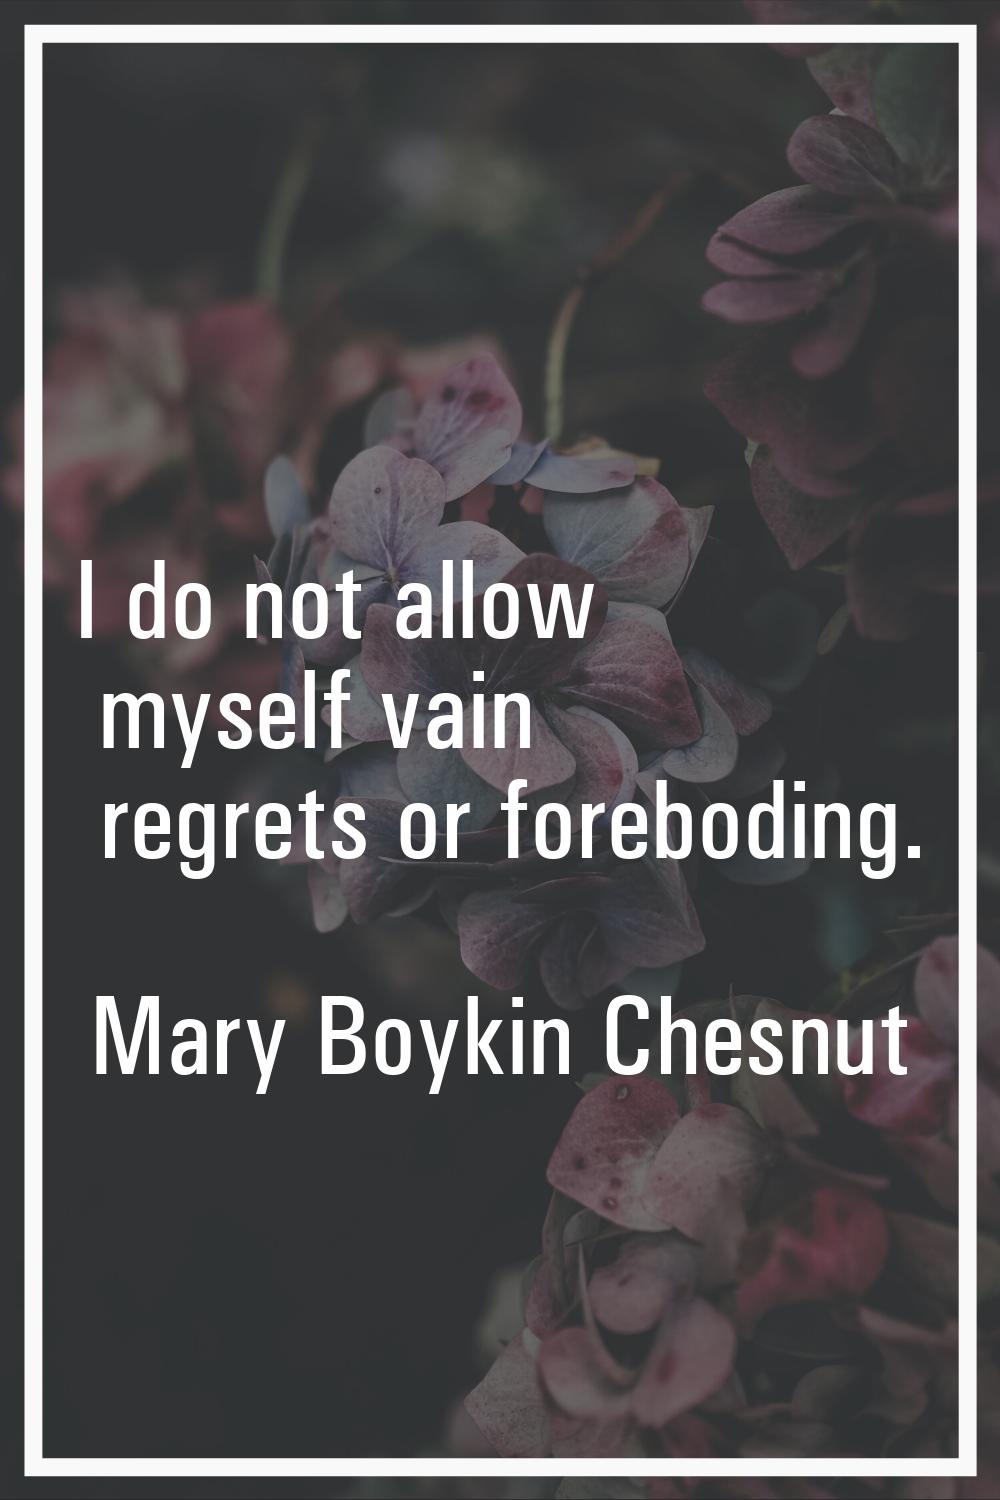 I do not allow myself vain regrets or foreboding.